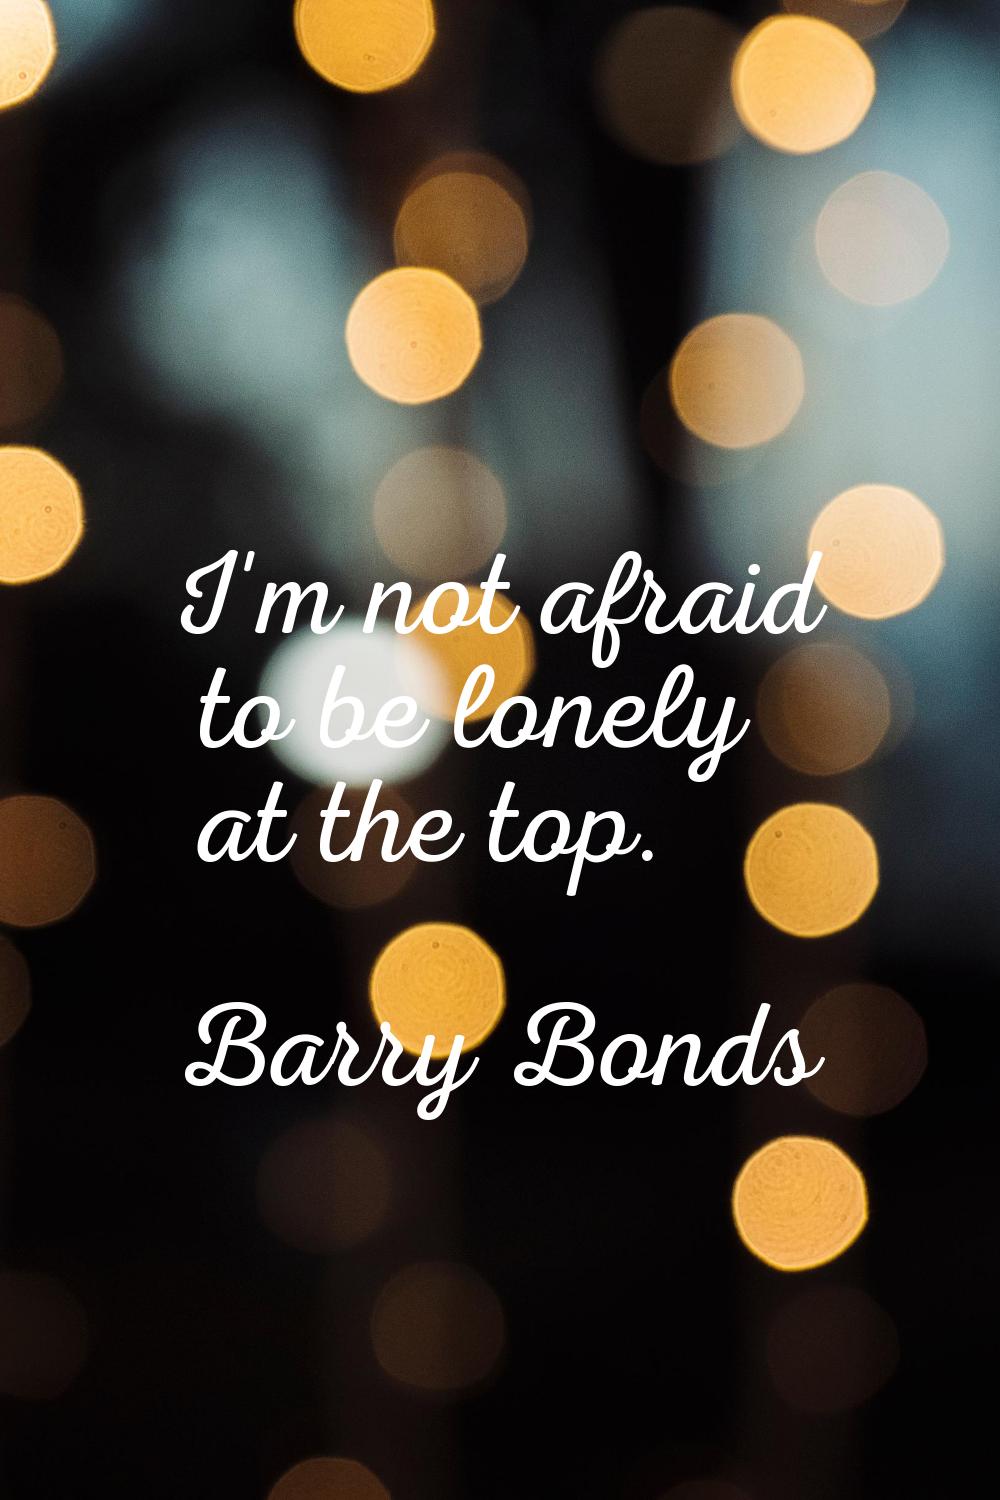 I'm not afraid to be lonely at the top.